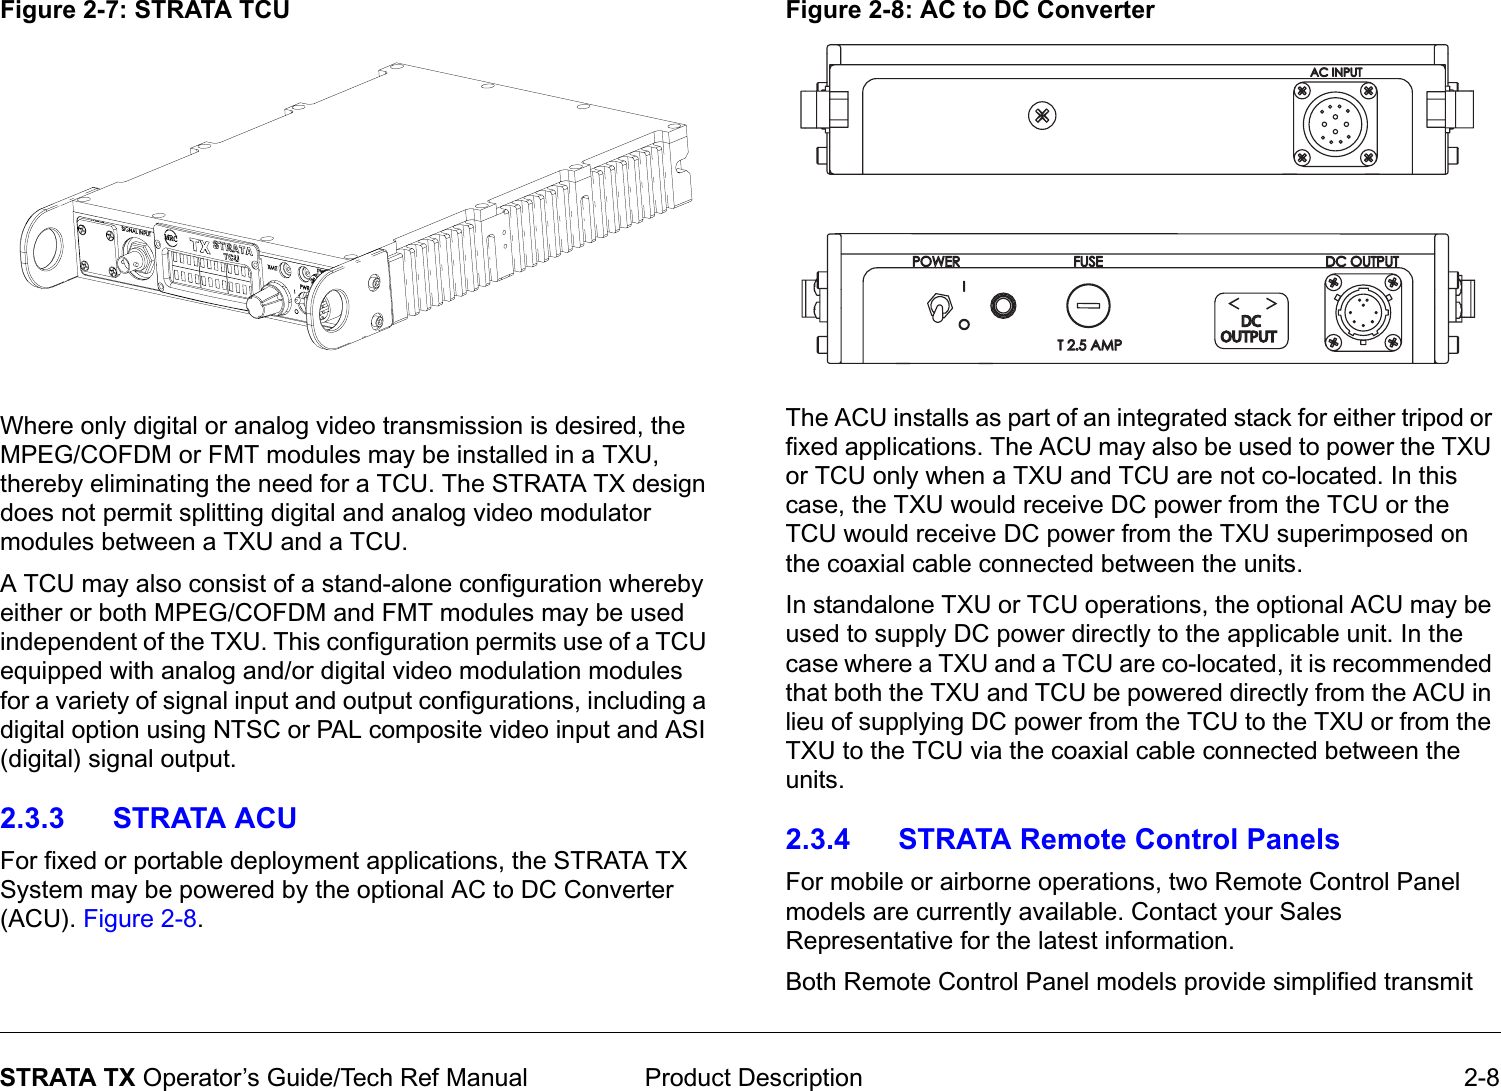  Product Description 2-8STRATA TX Operator’s Guide/Tech Ref ManualFigure 2-7: STRATA TCUWhere only digital or analog video transmission is desired, the MPEG/COFDM or FMT modules may be installed in a TXU, thereby eliminating the need for a TCU. The STRATA TX design does not permit splitting digital and analog video modulator modules between a TXU and a TCU. A TCU may also consist of a stand-alone configuration whereby either or both MPEG/COFDM and FMT modules may be used independent of the TXU. This configuration permits use of a TCU equipped with analog and/or digital video modulation modules for a variety of signal input and output configurations, including a digital option using NTSC or PAL composite video input and ASI (digital) signal output. 2.3.3 STRATA ACUFor fixed or portable deployment applications, the STRATA TX System may be powered by the optional AC to DC Converter (ACU). Figure 2-8. Figure 2-8: AC to DC ConverterThe ACU installs as part of an integrated stack for either tripod or fixed applications. The ACU may also be used to power the TXU or TCU only when a TXU and TCU are not co-located. In this case, the TXU would receive DC power from the TCU or the TCU would receive DC power from the TXU superimposed on the coaxial cable connected between the units.In standalone TXU or TCU operations, the optional ACU may be used to supply DC power directly to the applicable unit. In the case where a TXU and a TCU are co-located, it is recommended that both the TXU and TCU be powered directly from the ACU in lieu of supplying DC power from the TCU to the TXU or from the TXU to the TCU via the coaxial cable connected between the units.2.3.4 STRATA Remote Control PanelsFor mobile or airborne operations, two Remote Control Panel models are currently available. Contact your Sales Representative for the latest information.Both Remote Control Panel models provide simplified transmit OUTPUTOUTPUT&lt;  &gt;&lt;  &gt;DCDC